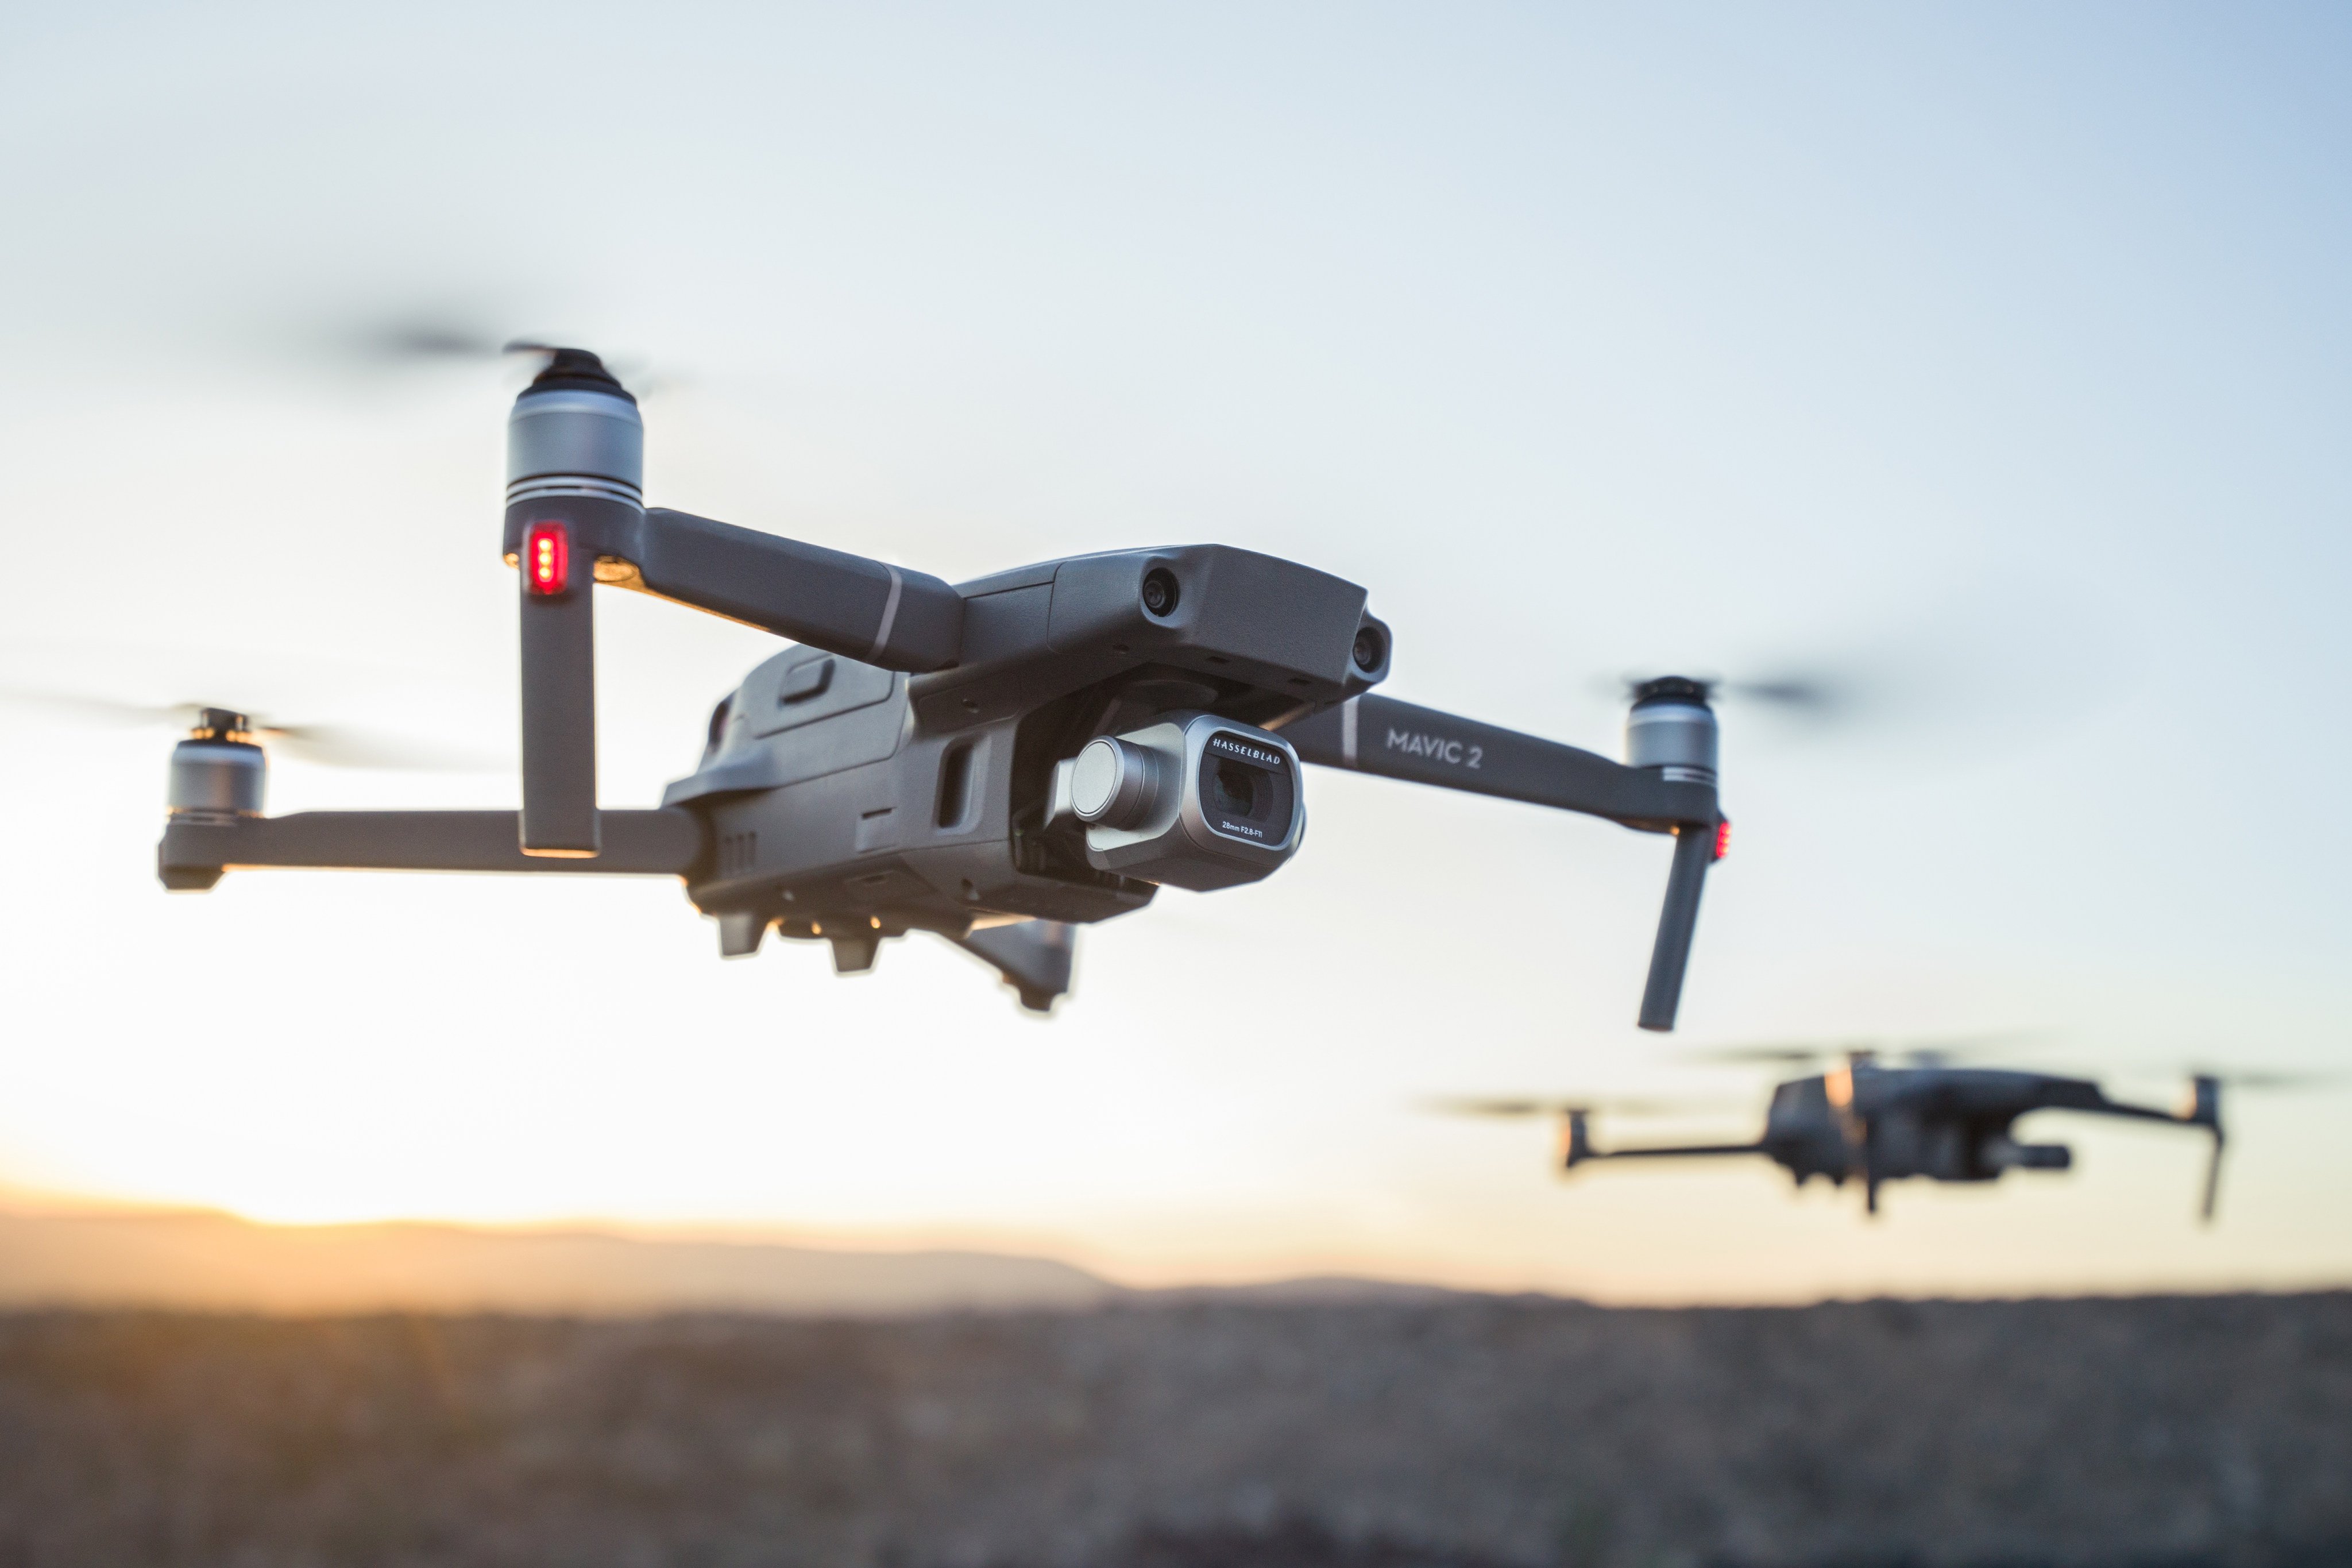 Chinese authorities say a new drone law introduced on Wednesday and taking effect in 2024 law addresses potential dangers from the rapid proliferation of drones in fields such as defence, agriculture and scientific research. Photo: Handout